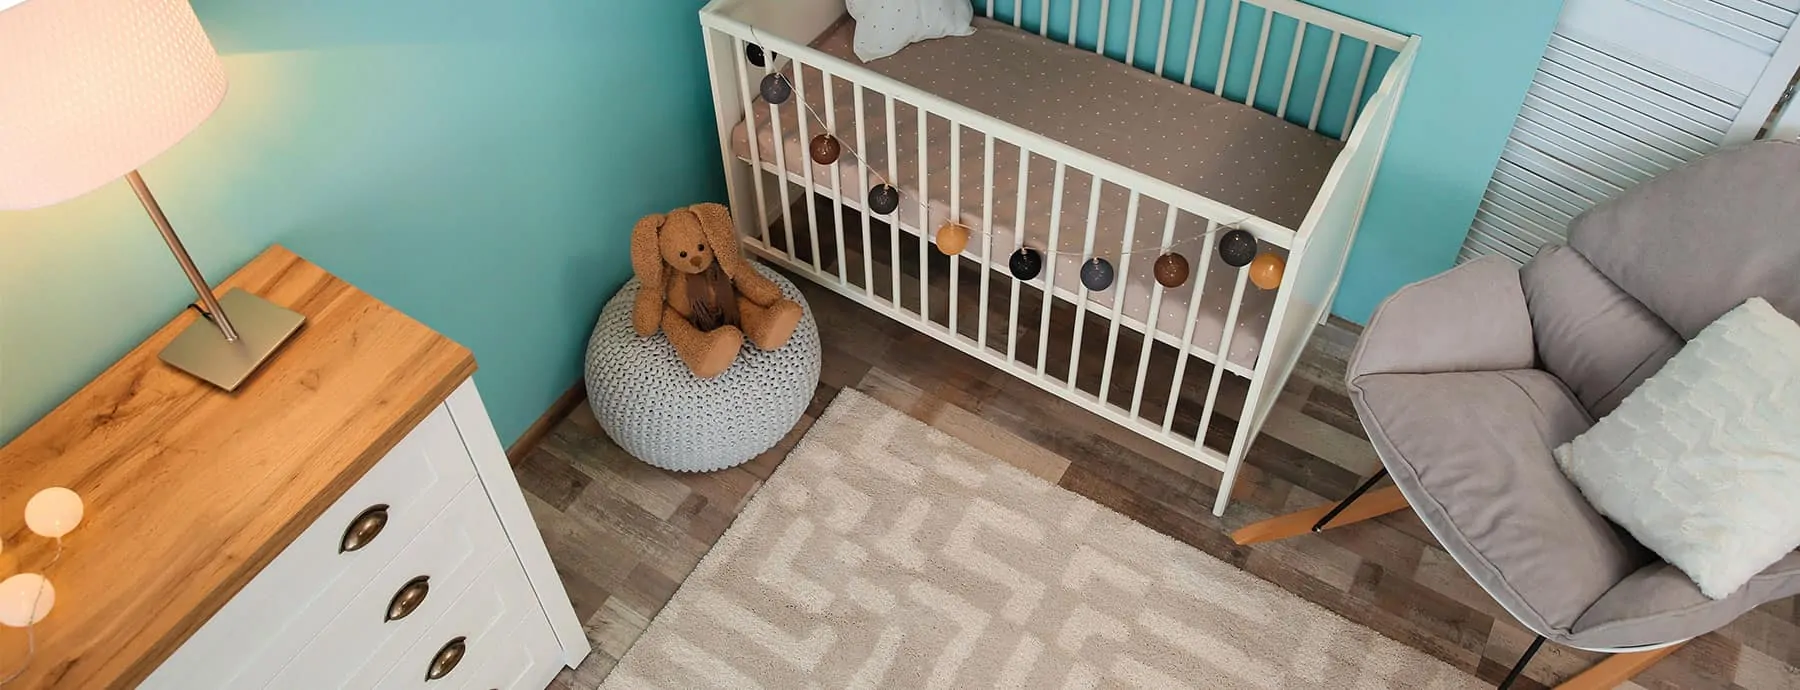 What items should I buy for baby room